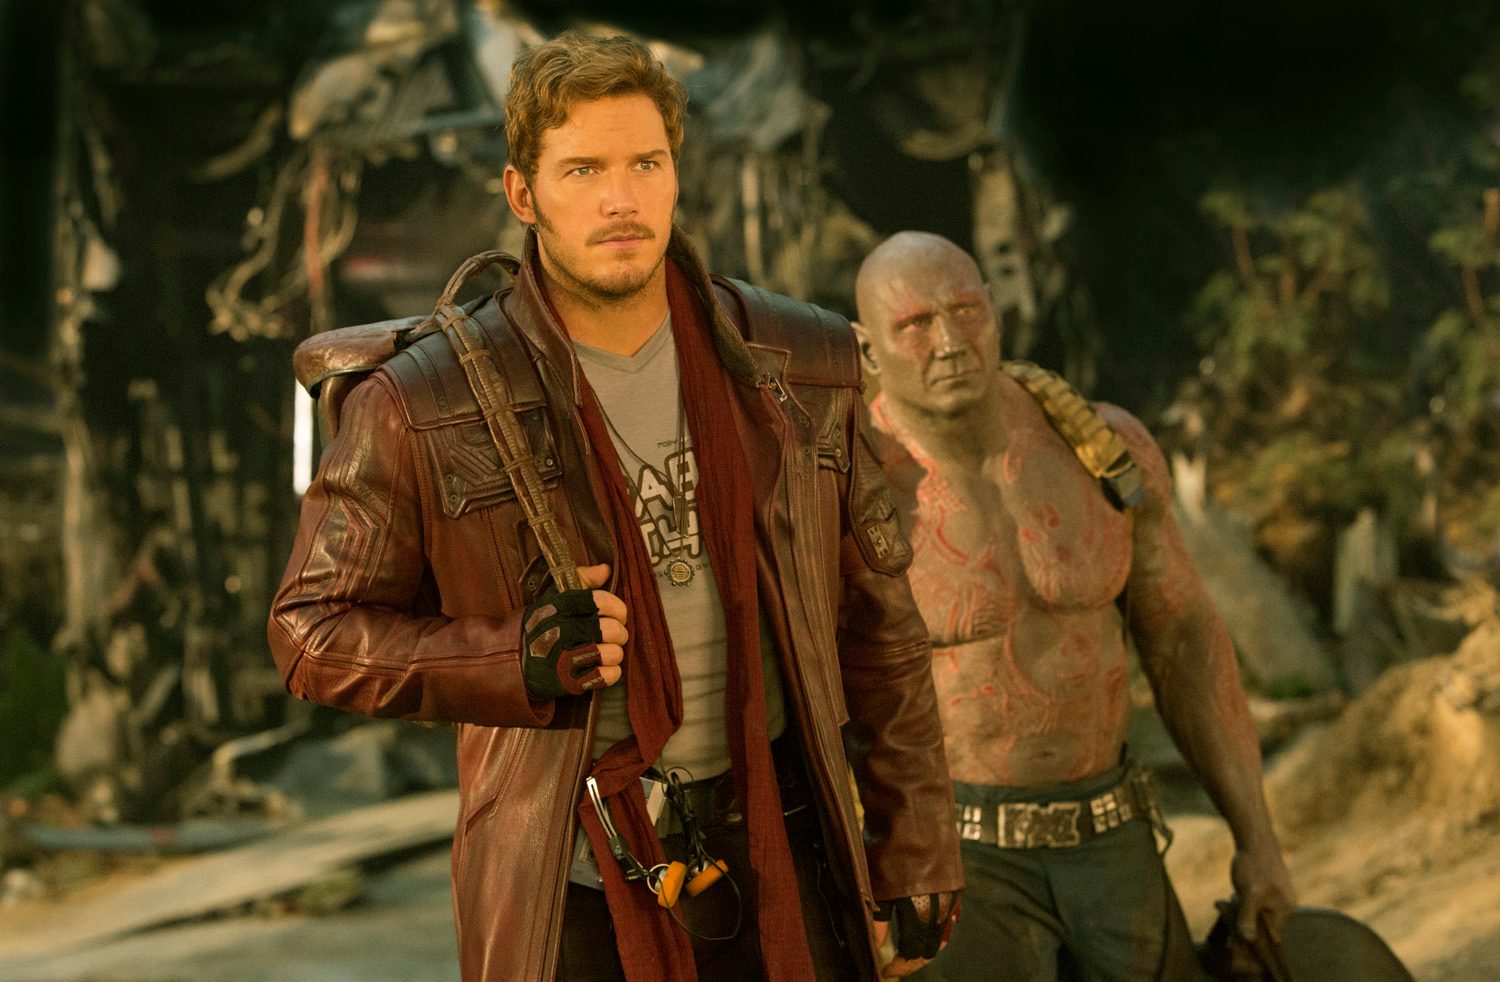 ‘Guardians of the Galaxy’ Vol 3 production on hold